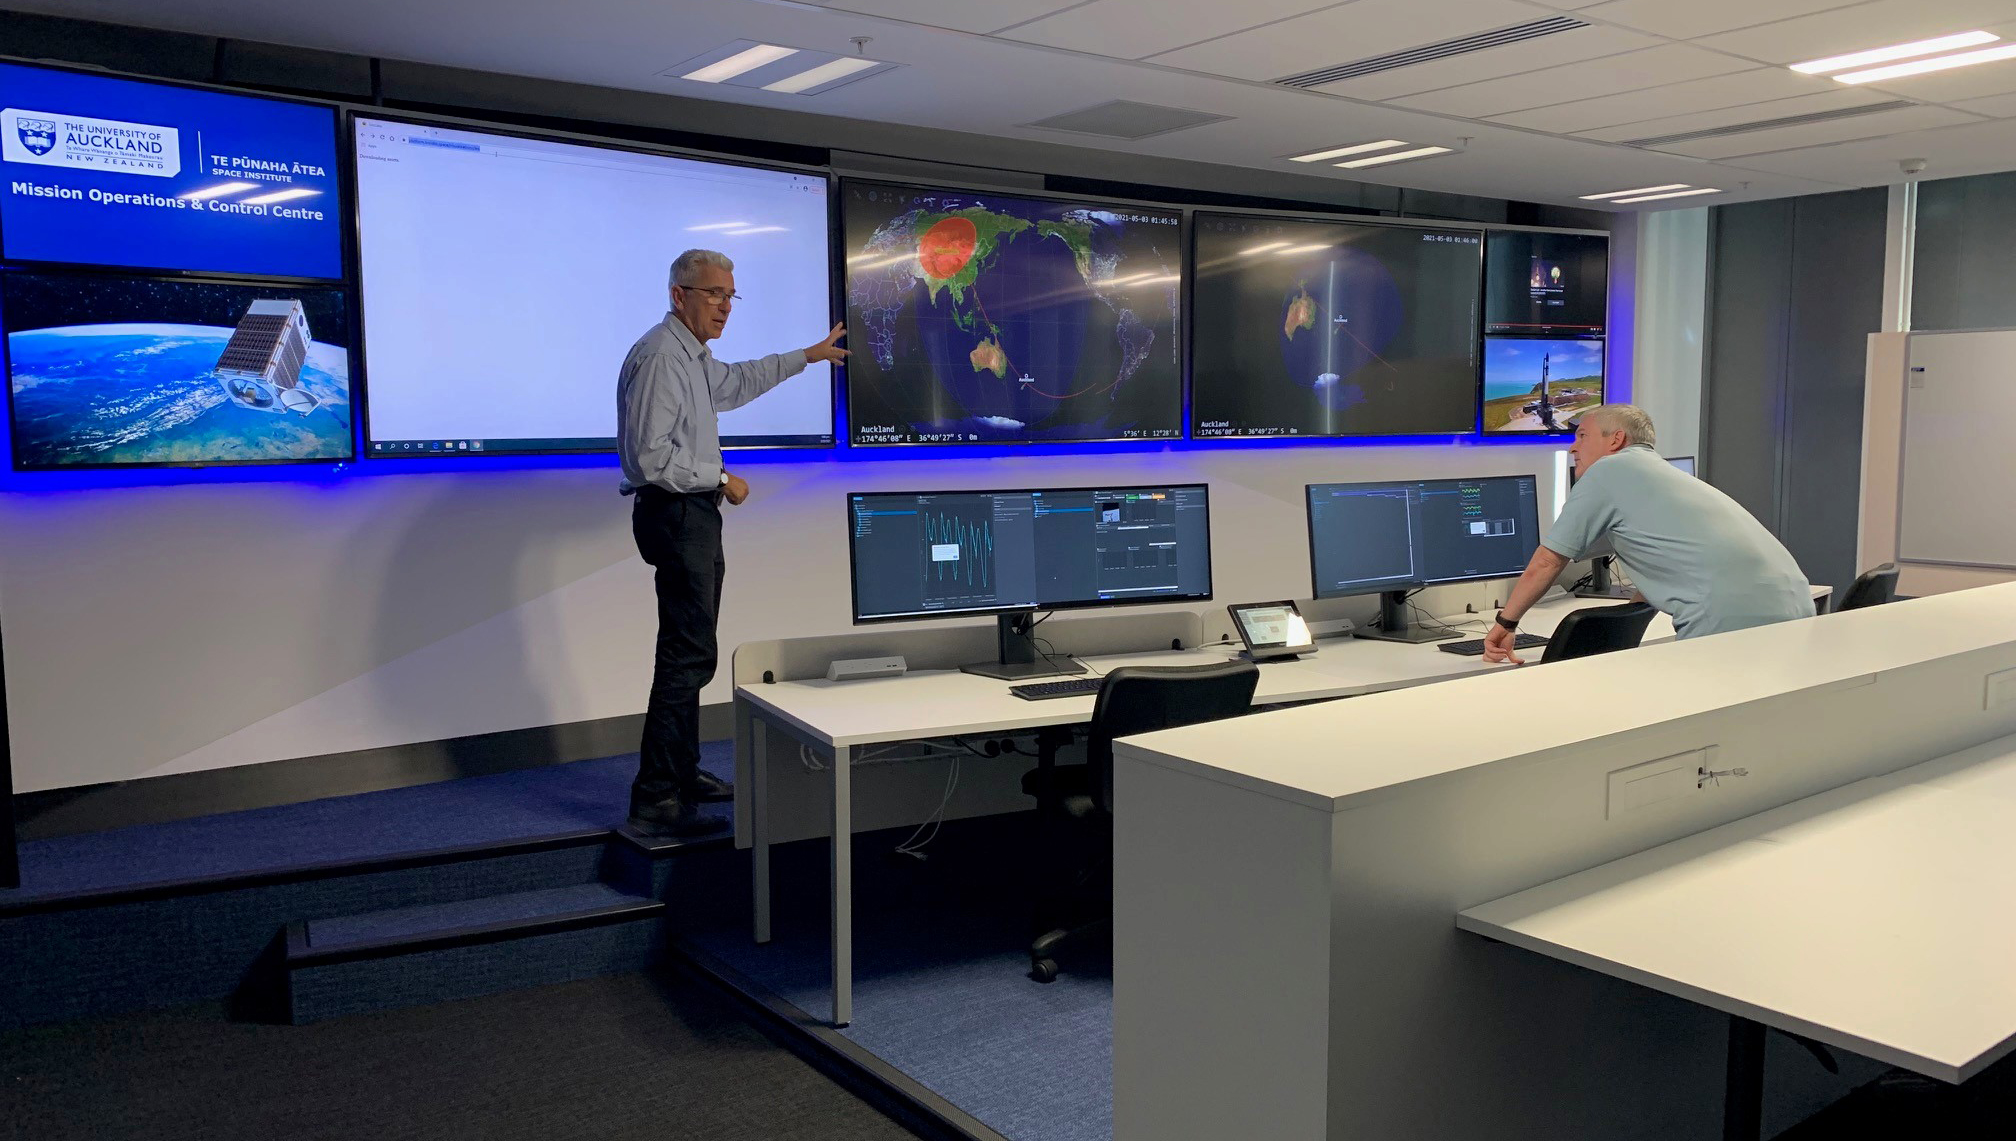 Mission operations centre - Auckland